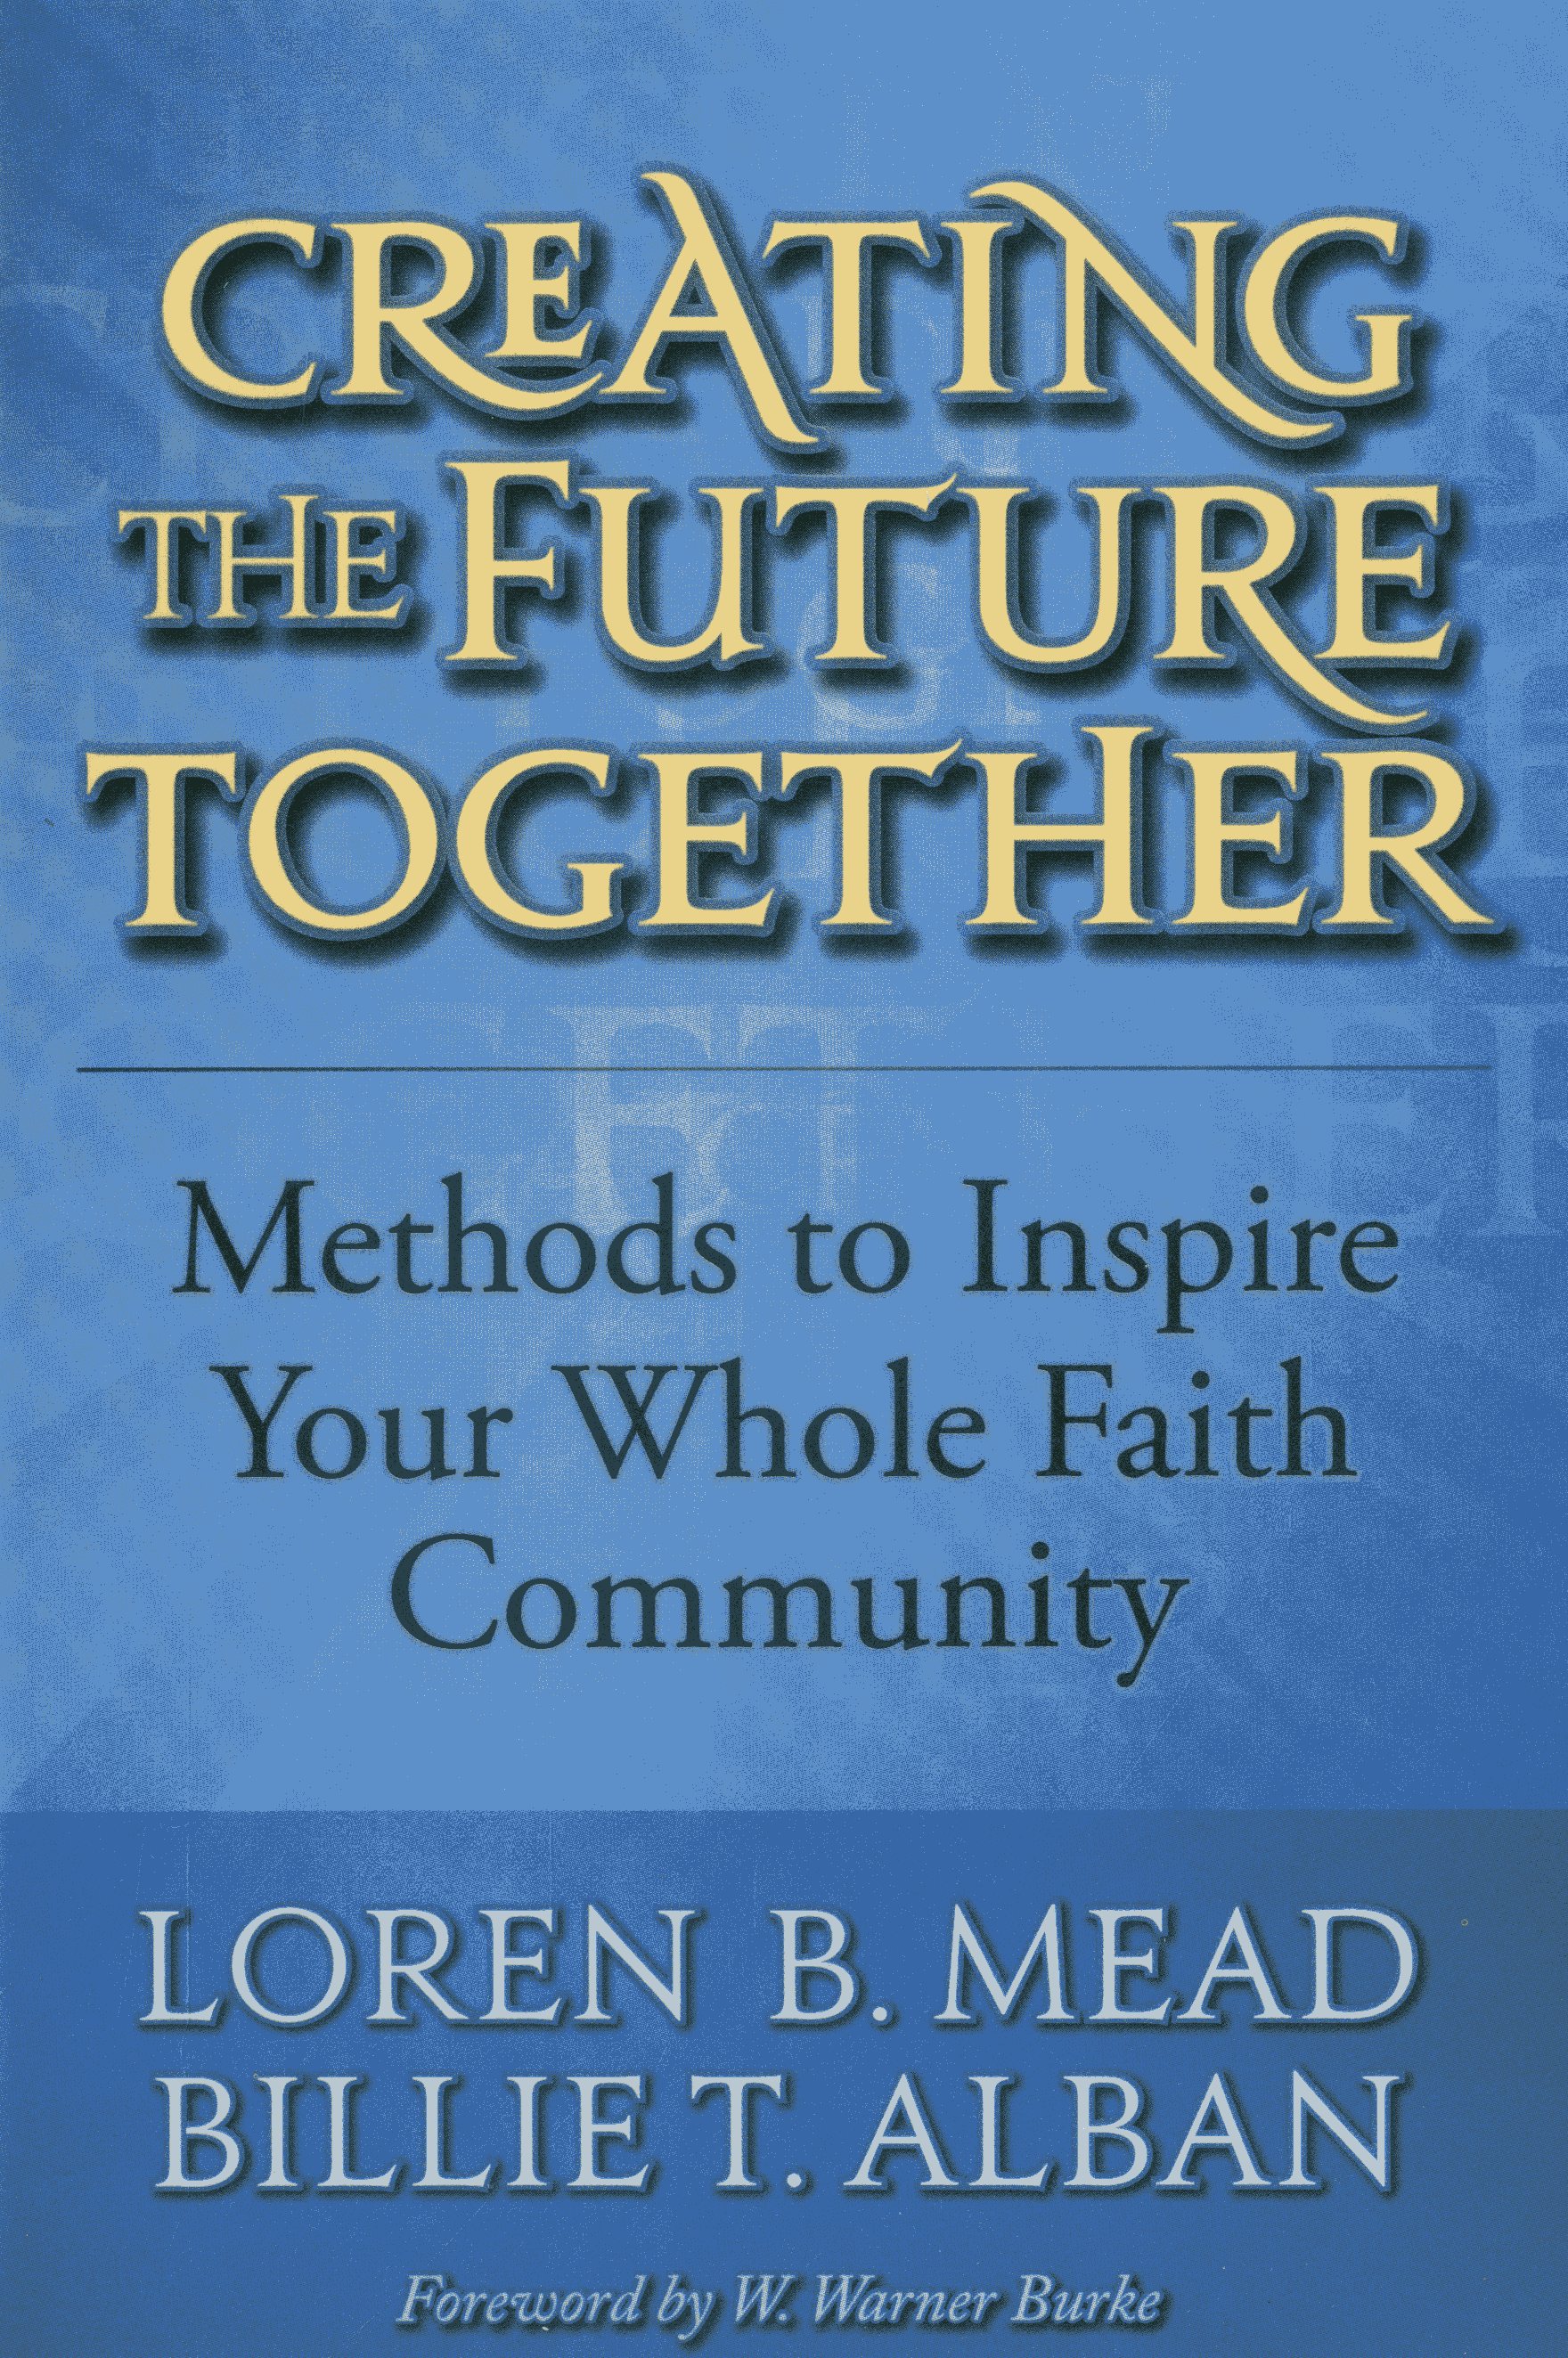 Creating the Future Together: Methods to Inspire Your Whole Faith Community